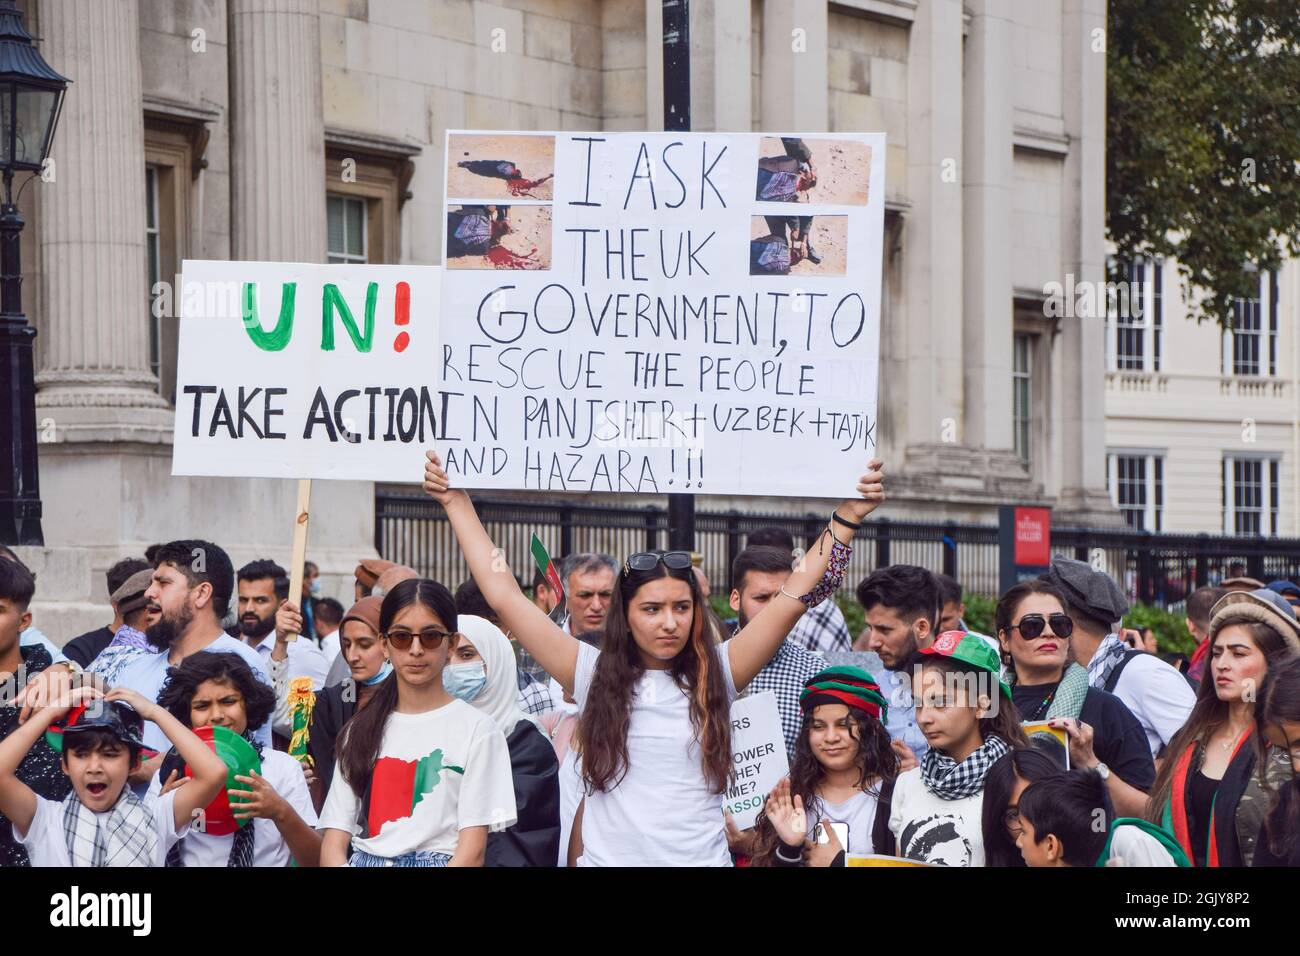 London, United Kingdom. 12th September 2021. Demonstrators gathered in Trafalgar Square on the 20th anniversary of the assassination of opposition commander Ahmad Shah Massoud, in protest against the Taliban takeover and to call on the UK and the international community to help Afghanistan. Credit: Vuk Valcic / Alamy Live News Stock Photo